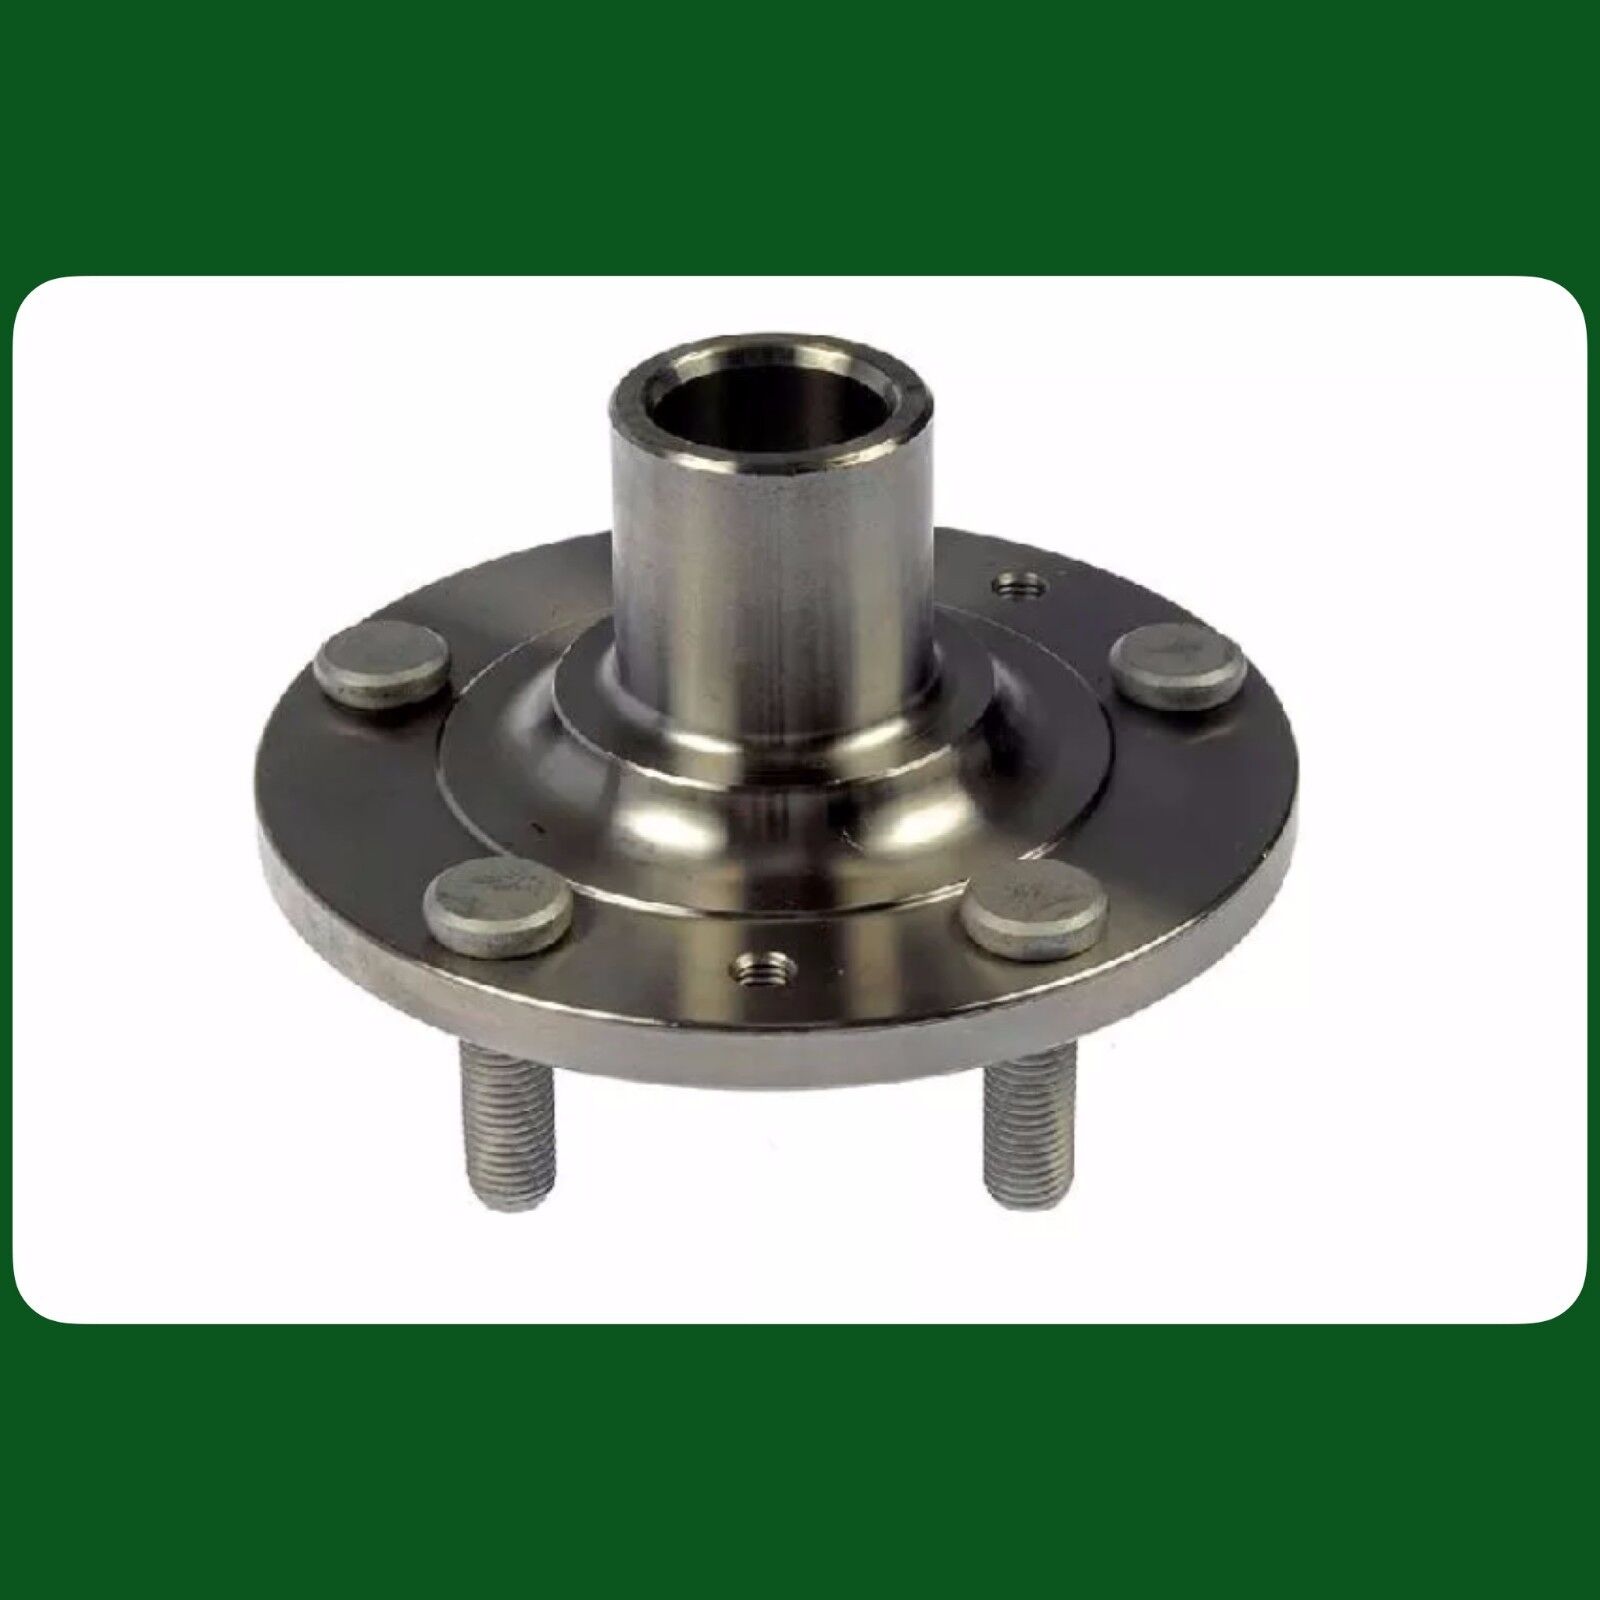 1 FRONT WHEEL HUB FOR  SUZUKI SX4 (2007-2013 ) 2WD ONLY LEFT OR RIGHT  NEW  